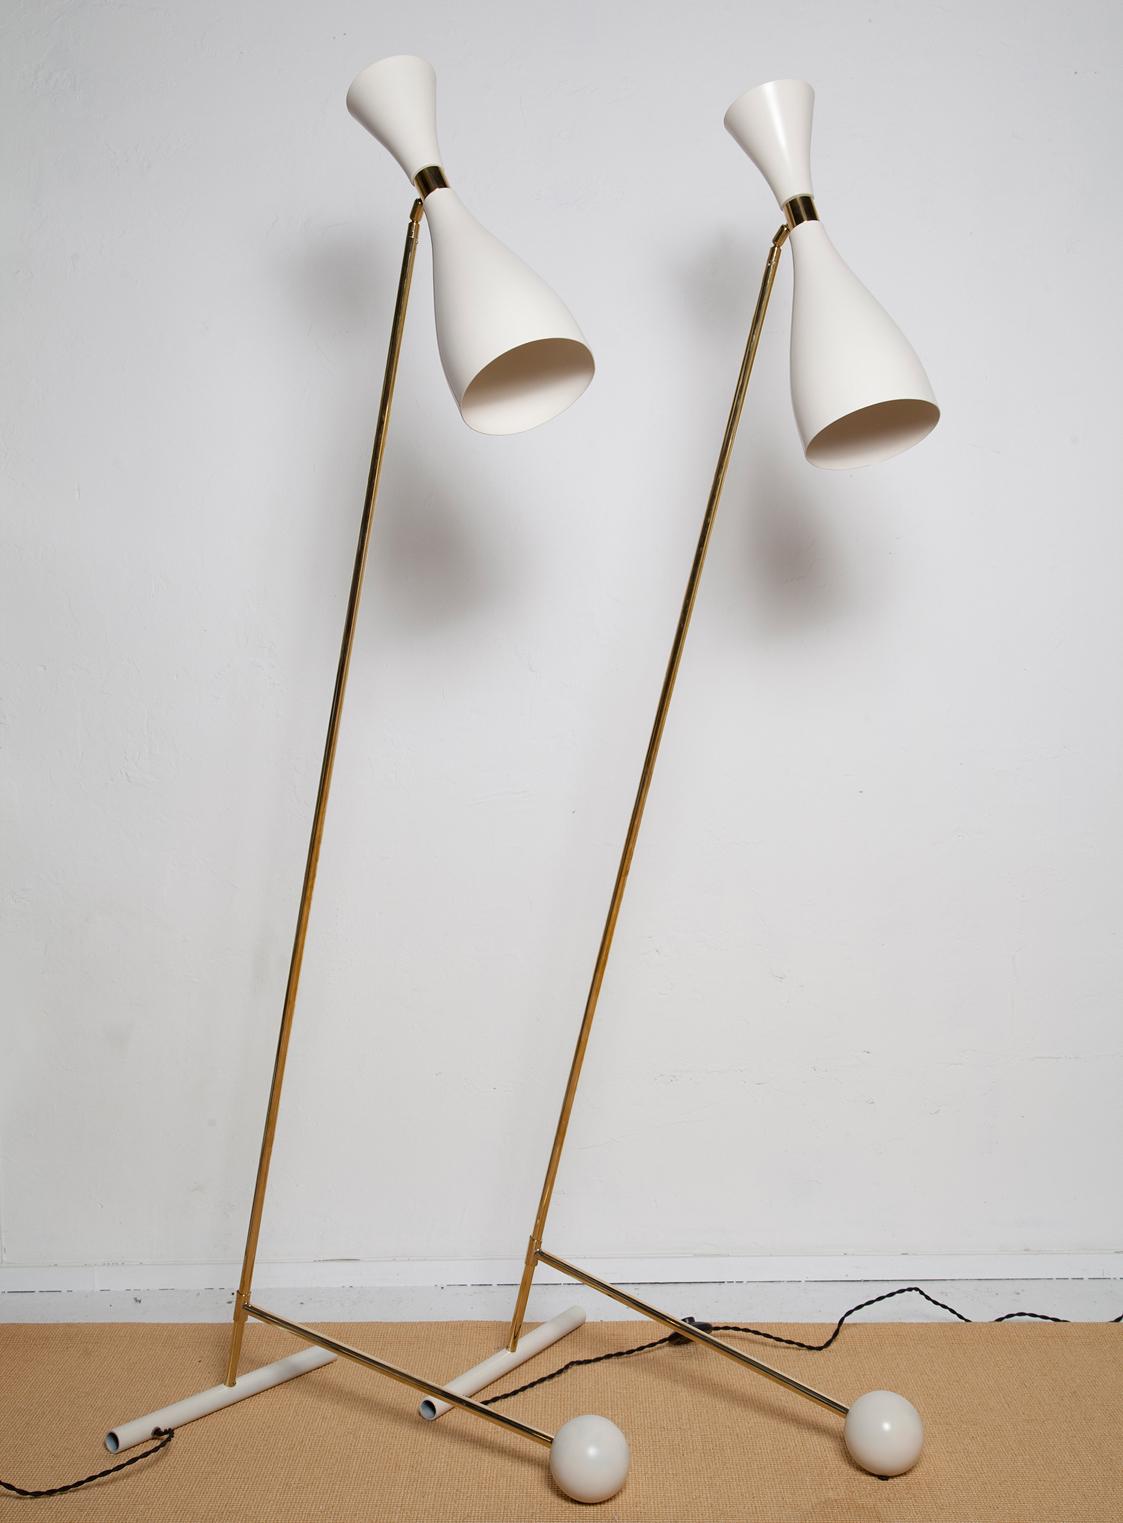 Fully restored brass and cream enameled, 1950s Italian floor lamps in the manner of Stilnovo. Counterweight design allows for height adjustability while shades swivel 180 degrees for multi-Directional lighting. New U.S. wiring, with both upper and